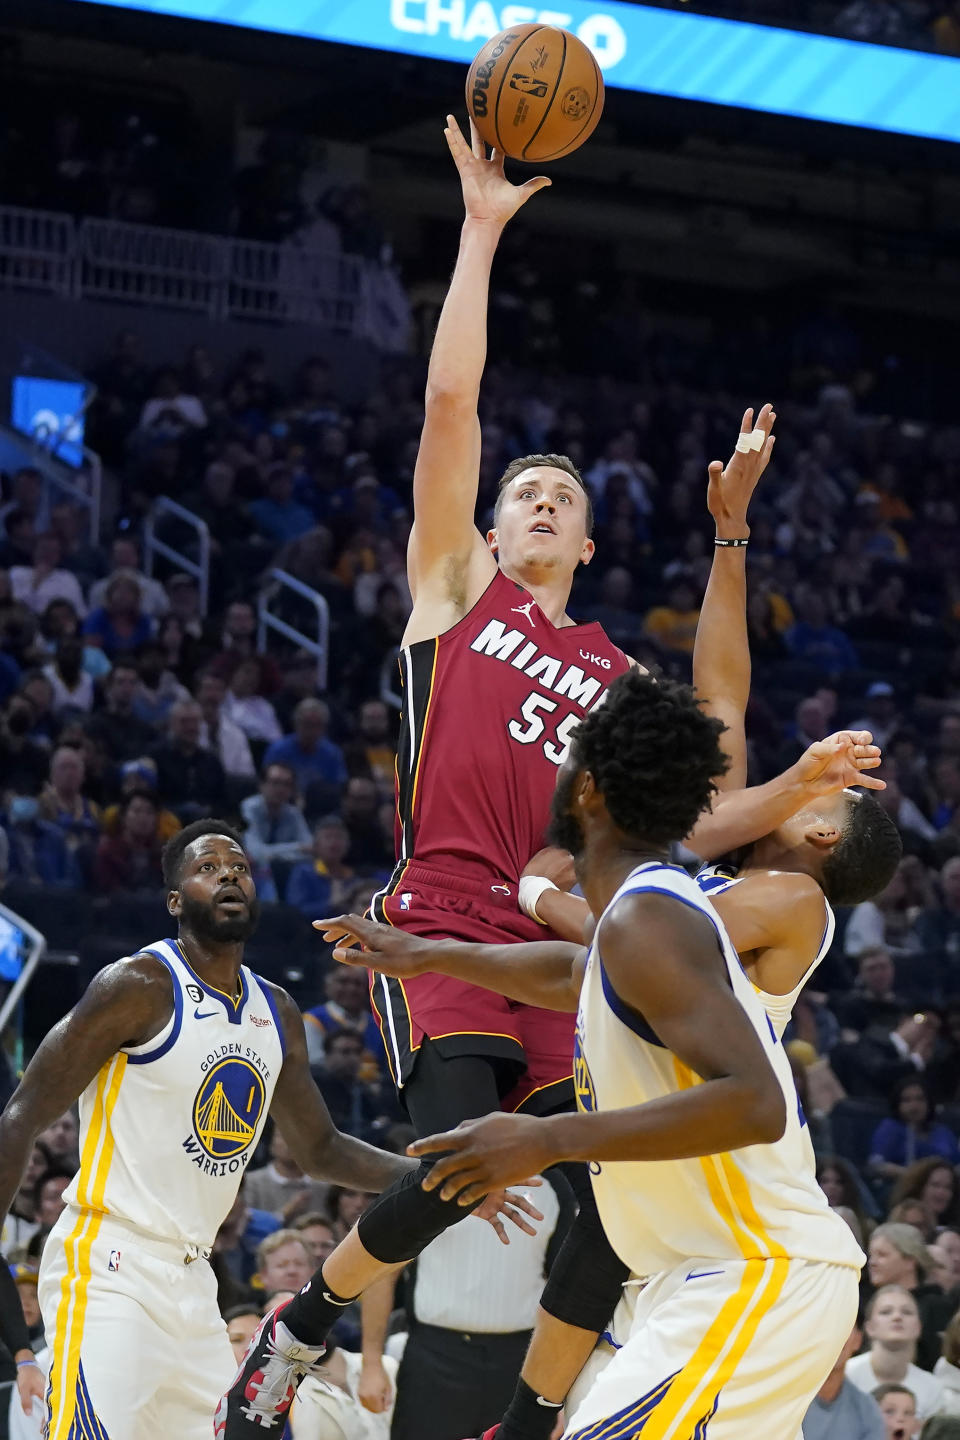 Miami Heat guard Duncan Robinson, top, shoots between Golden State Warriors forward JaMychal Green (1), guard Jordan Poole, right, and forward Andrew Wiggins during the first half of an NBA basketball game in San Francisco, Thursday, Oct. 27, 2022. (AP Photo/Jeff Chiu)